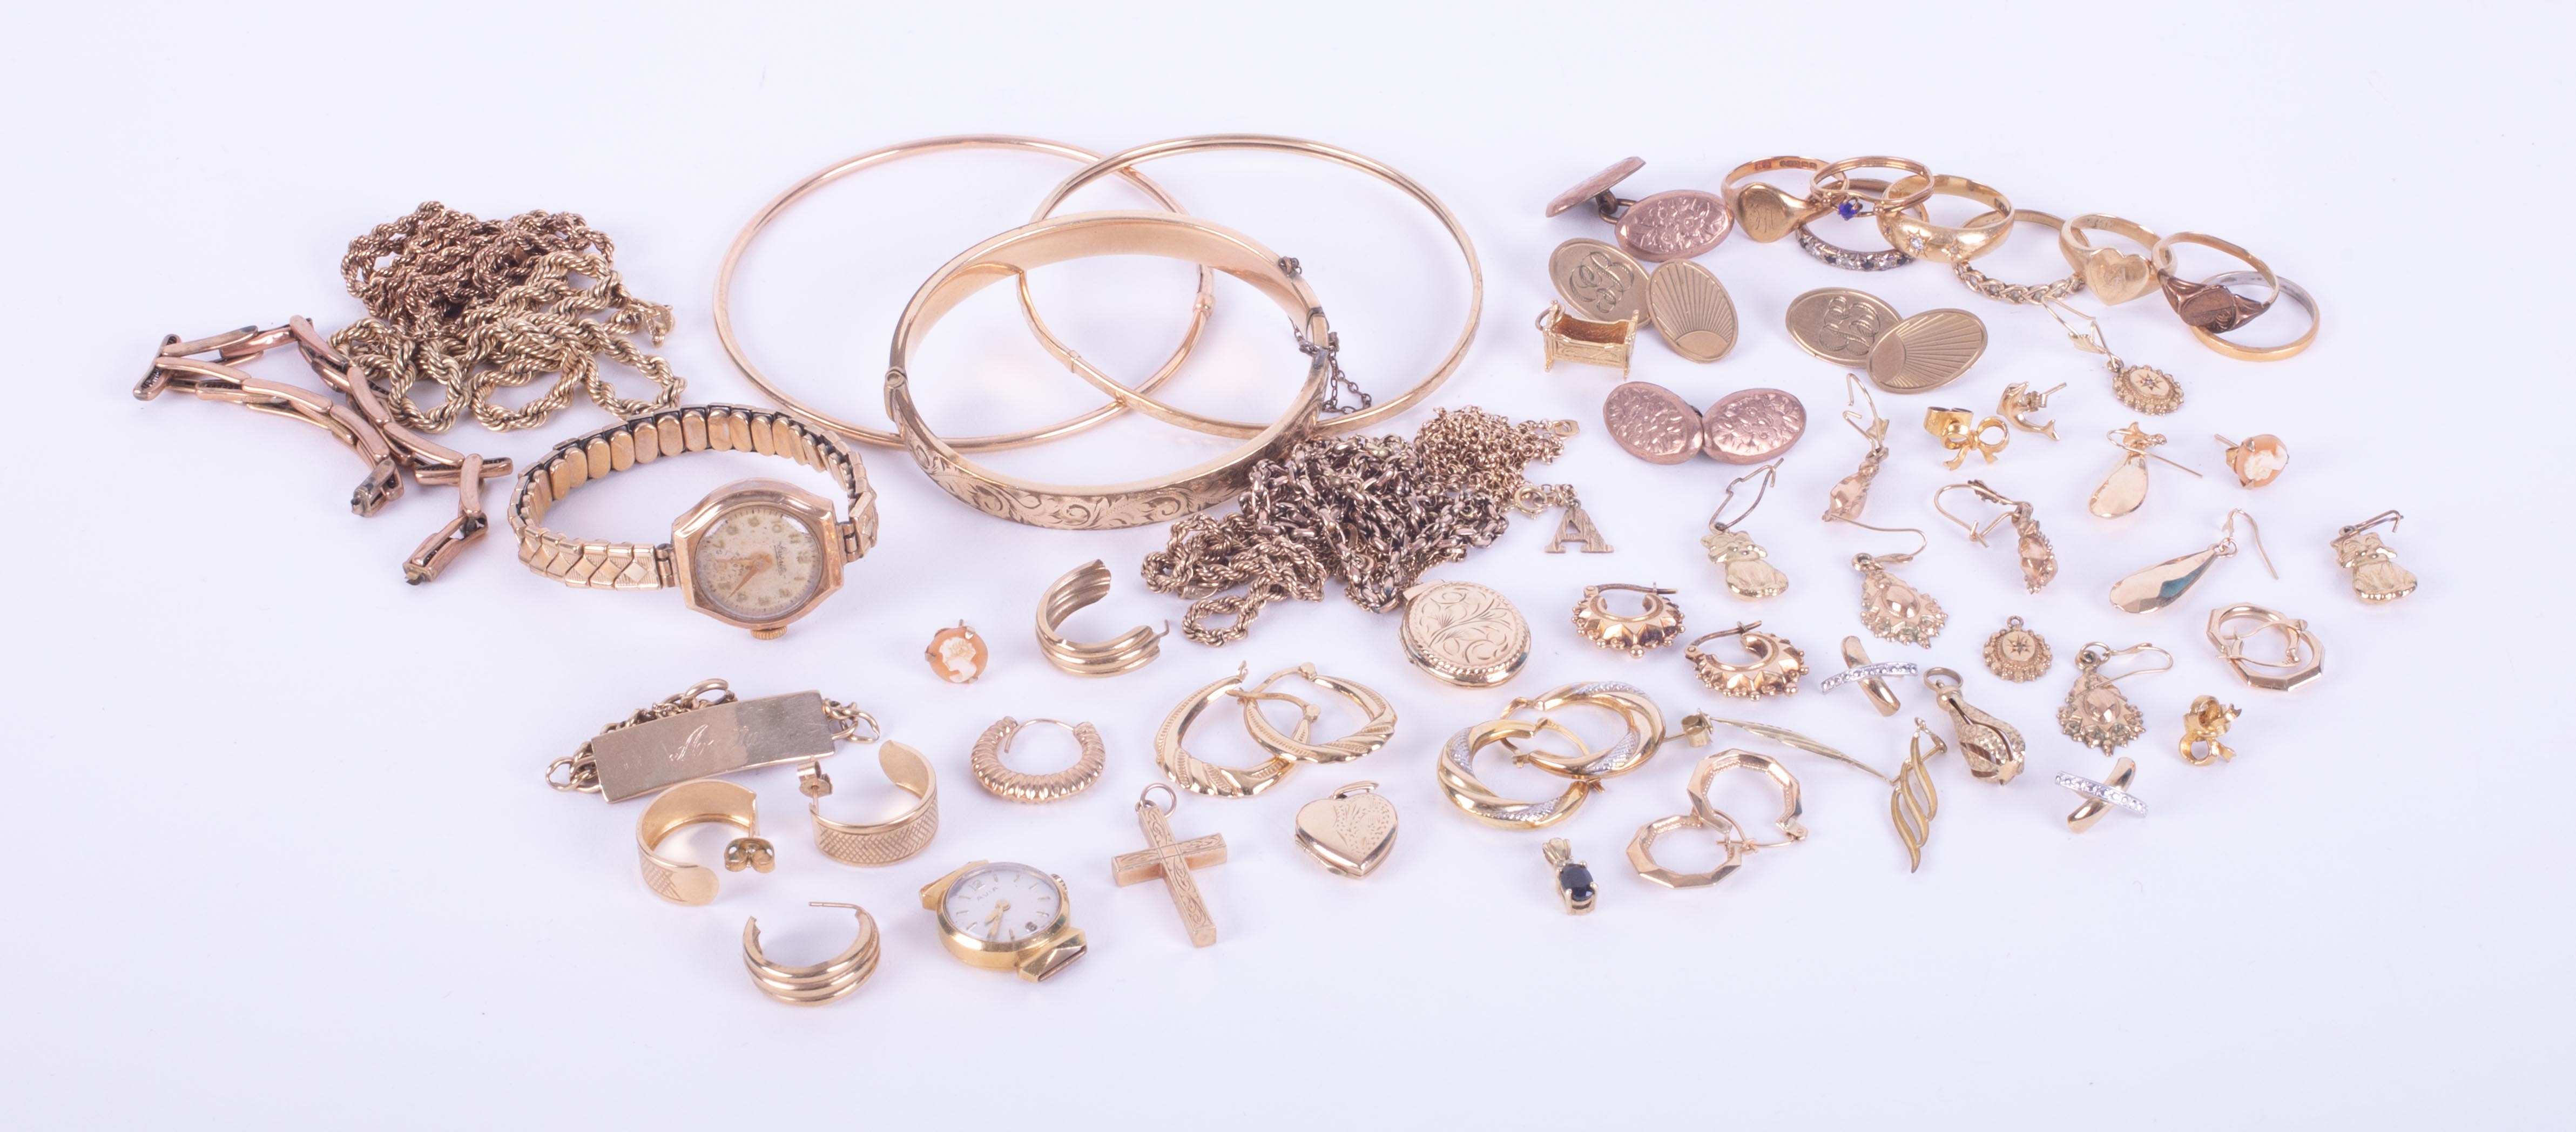 A mixed bag of 9ct yellow gold jewellery items including earrings, lockets, chain,